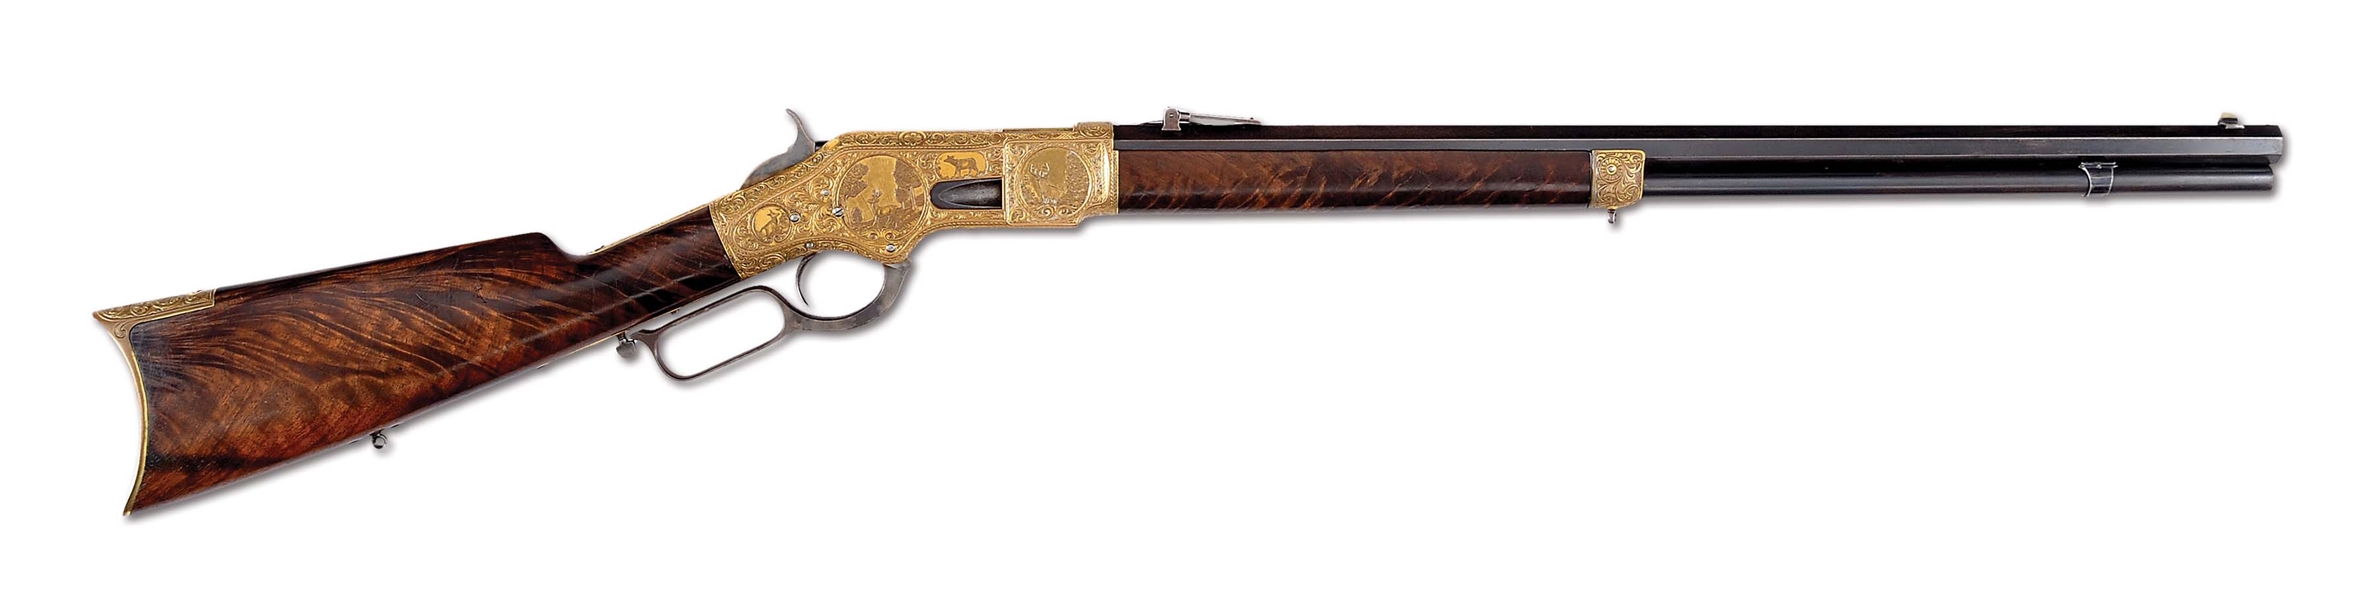 (A) EXTRAORDINARY, RARE & IMPORTANT ULRICH RELIEF ENGRAVED DELUXE WINCHESTER MODEL 1866 LEVER ACTION RIFLE.